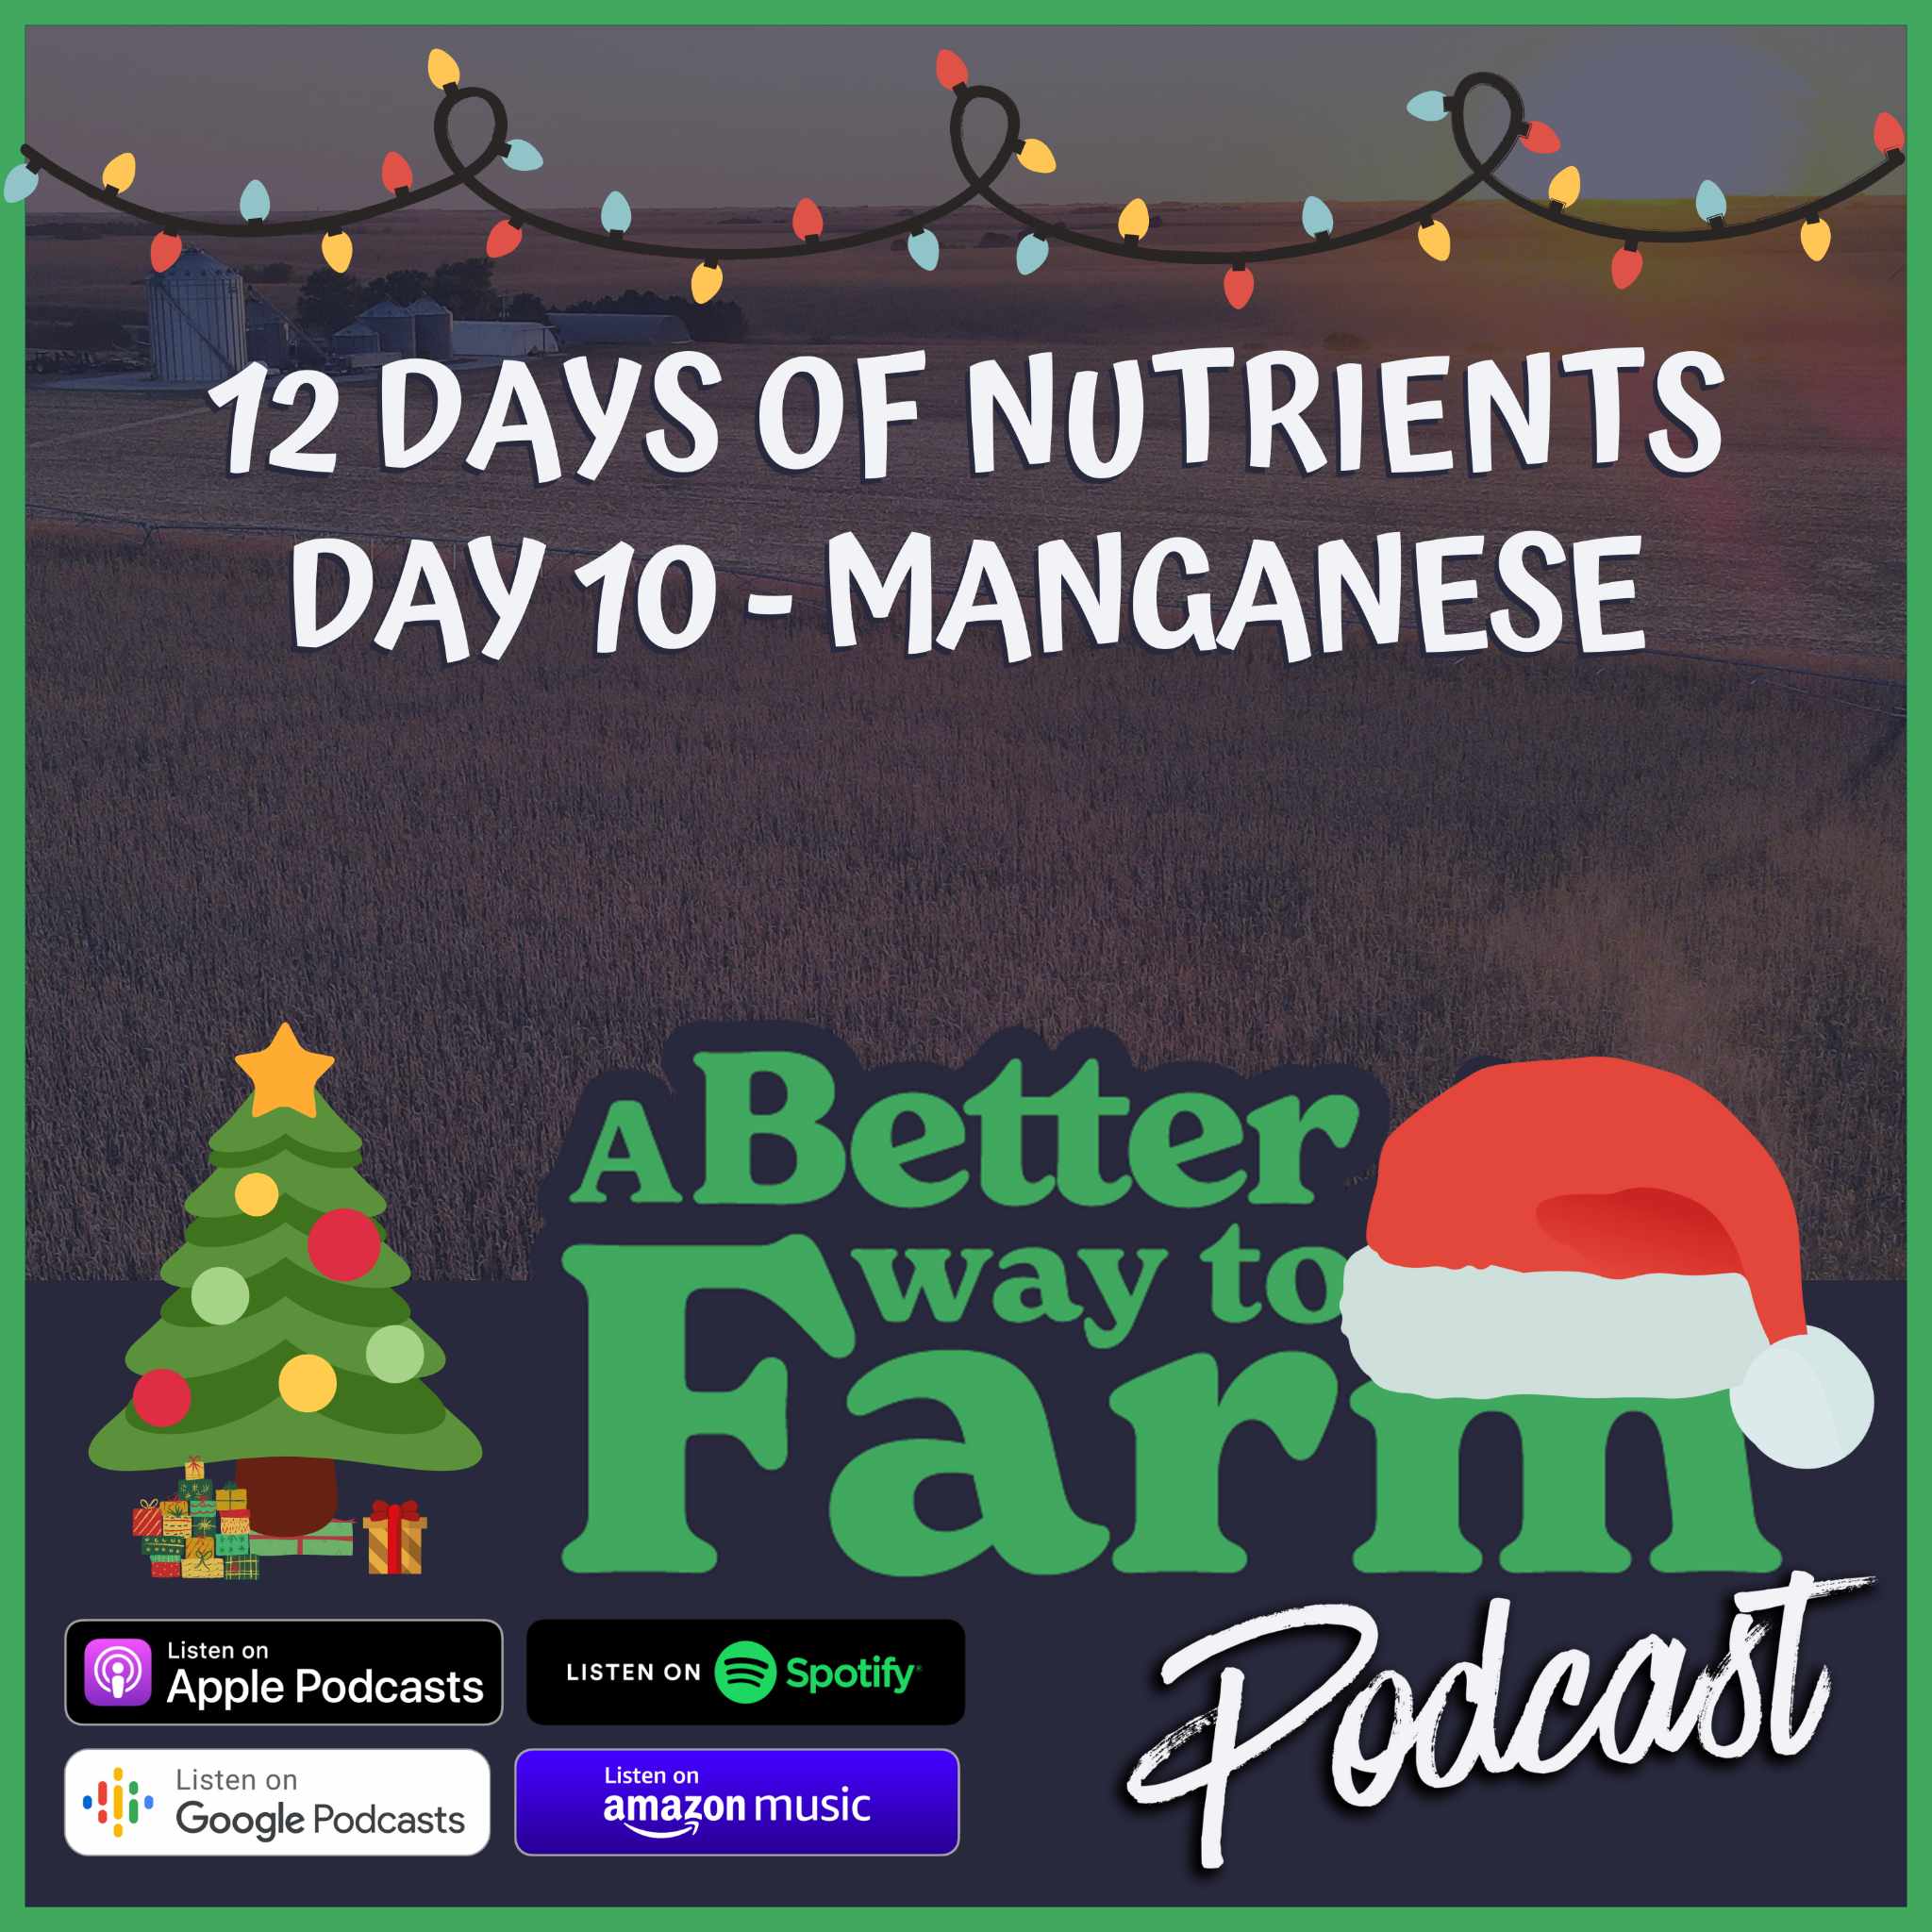 223: 12 Days of Nutrients - Day 10 Manganese